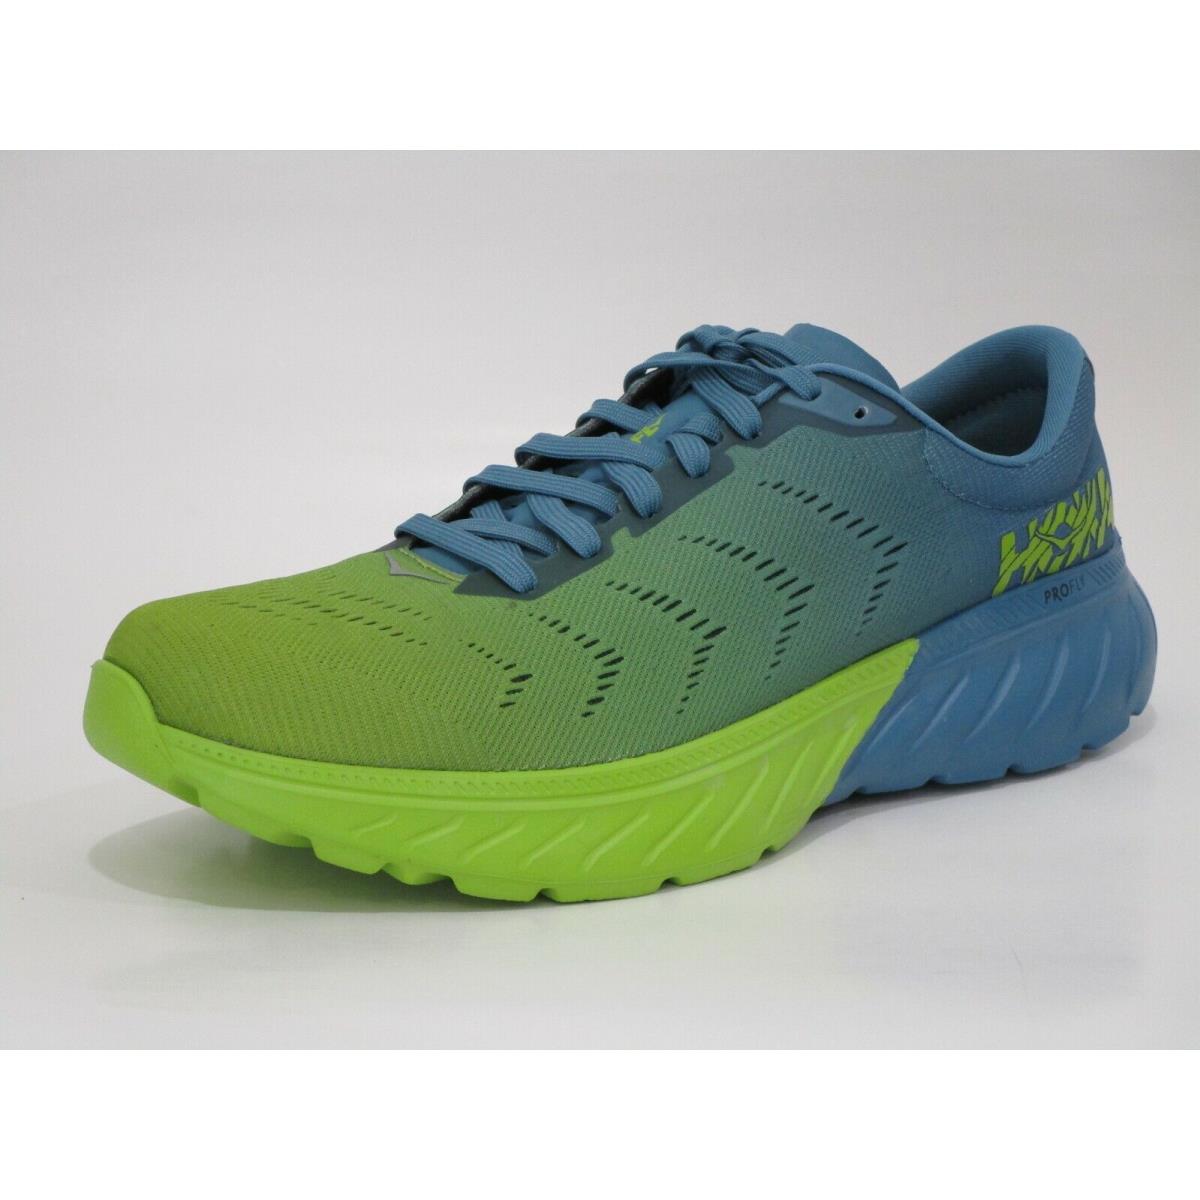 Hoka One One Men`s Mach 2 Running Sneaker Shoes Size 14 M US